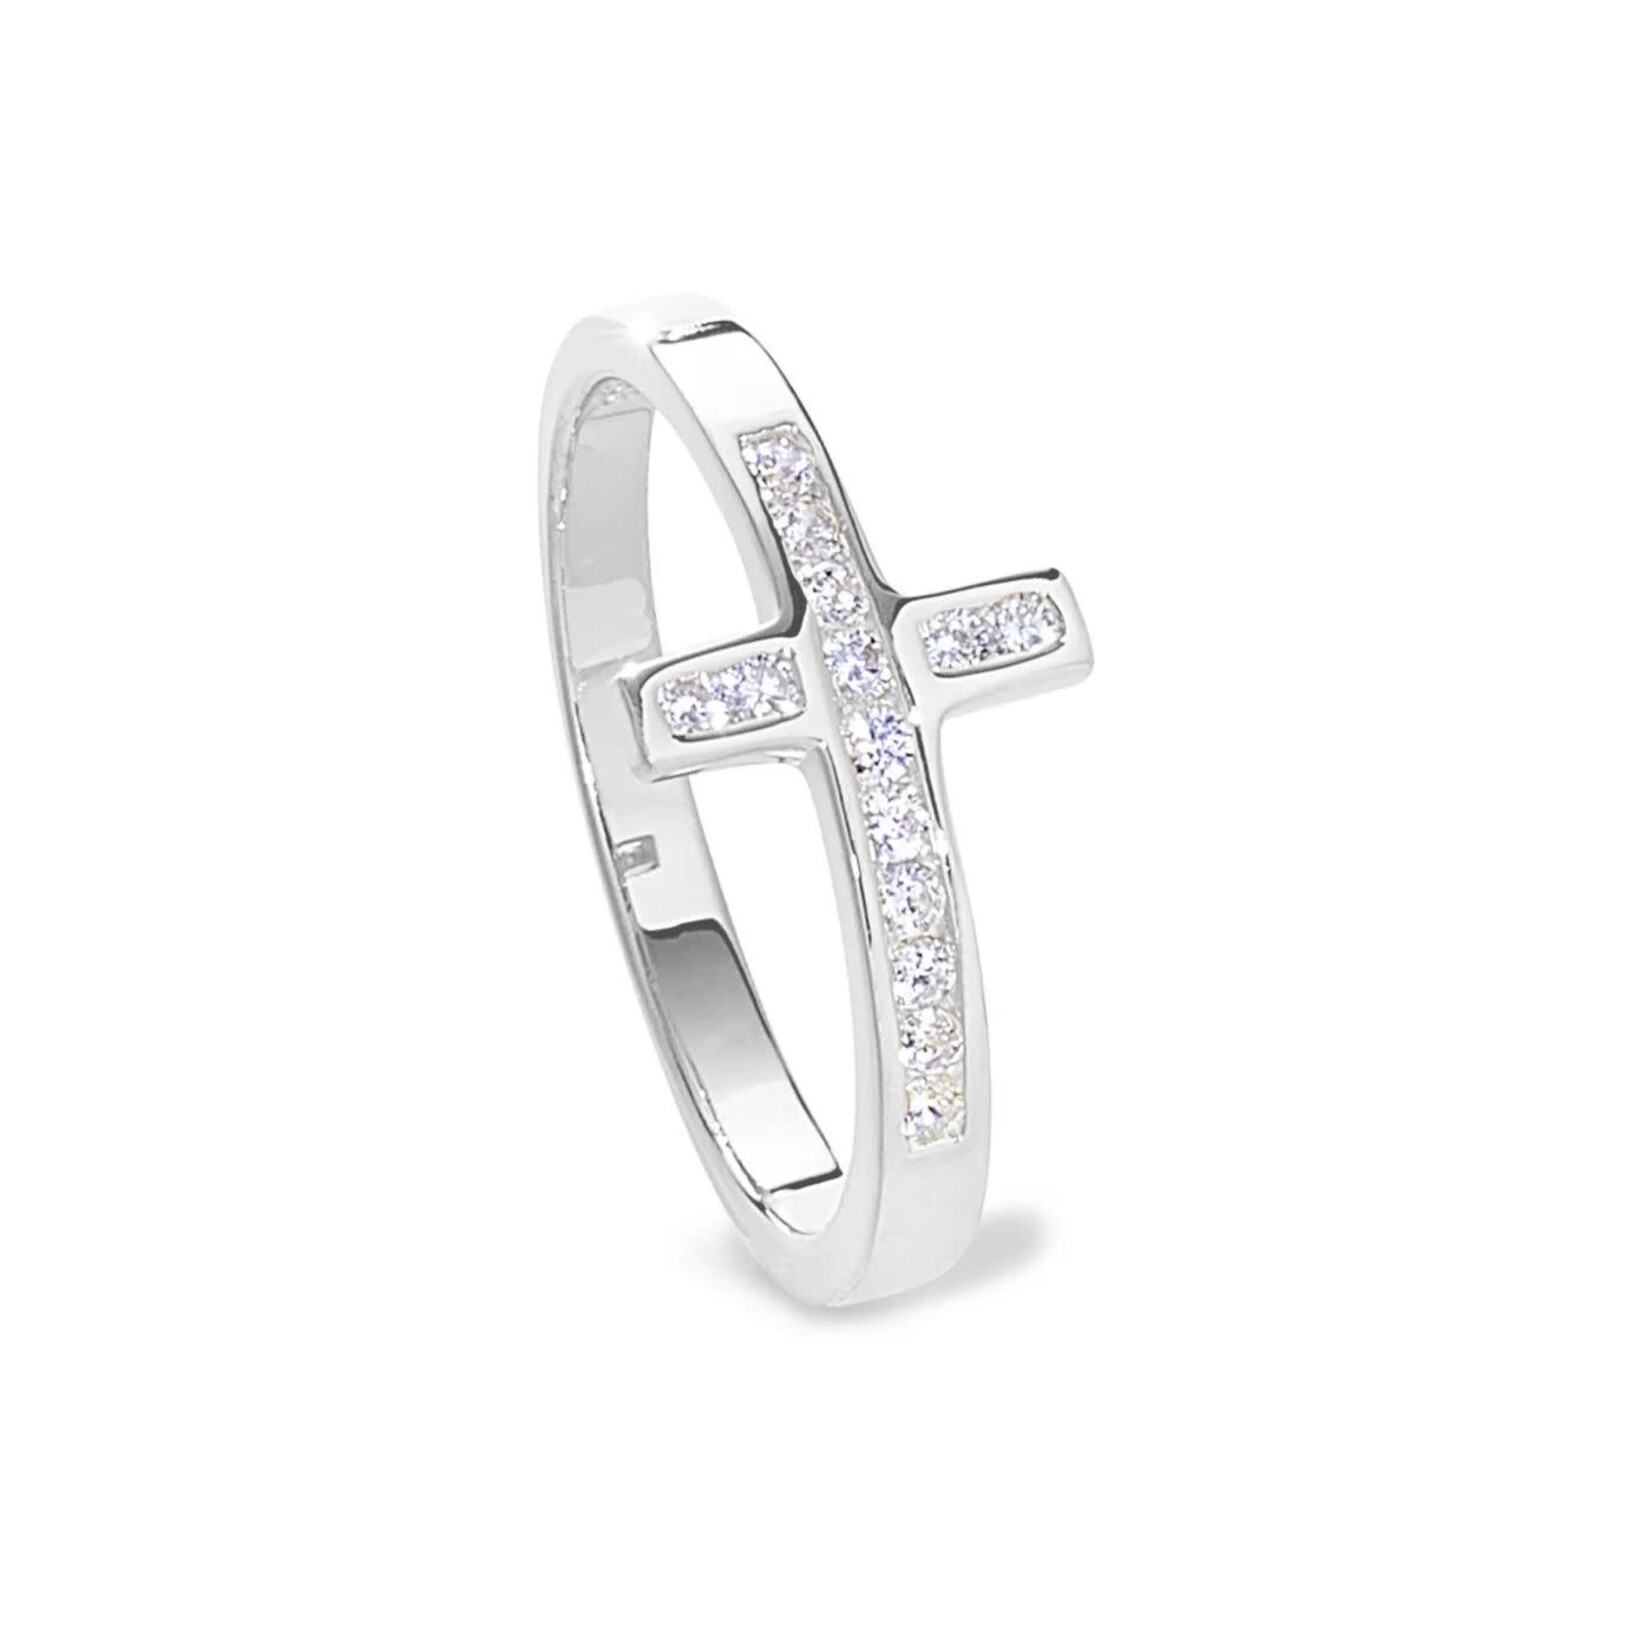 KELLY WATERS INC. Sterling Silver Cross Ring w/Simulated Diamonds